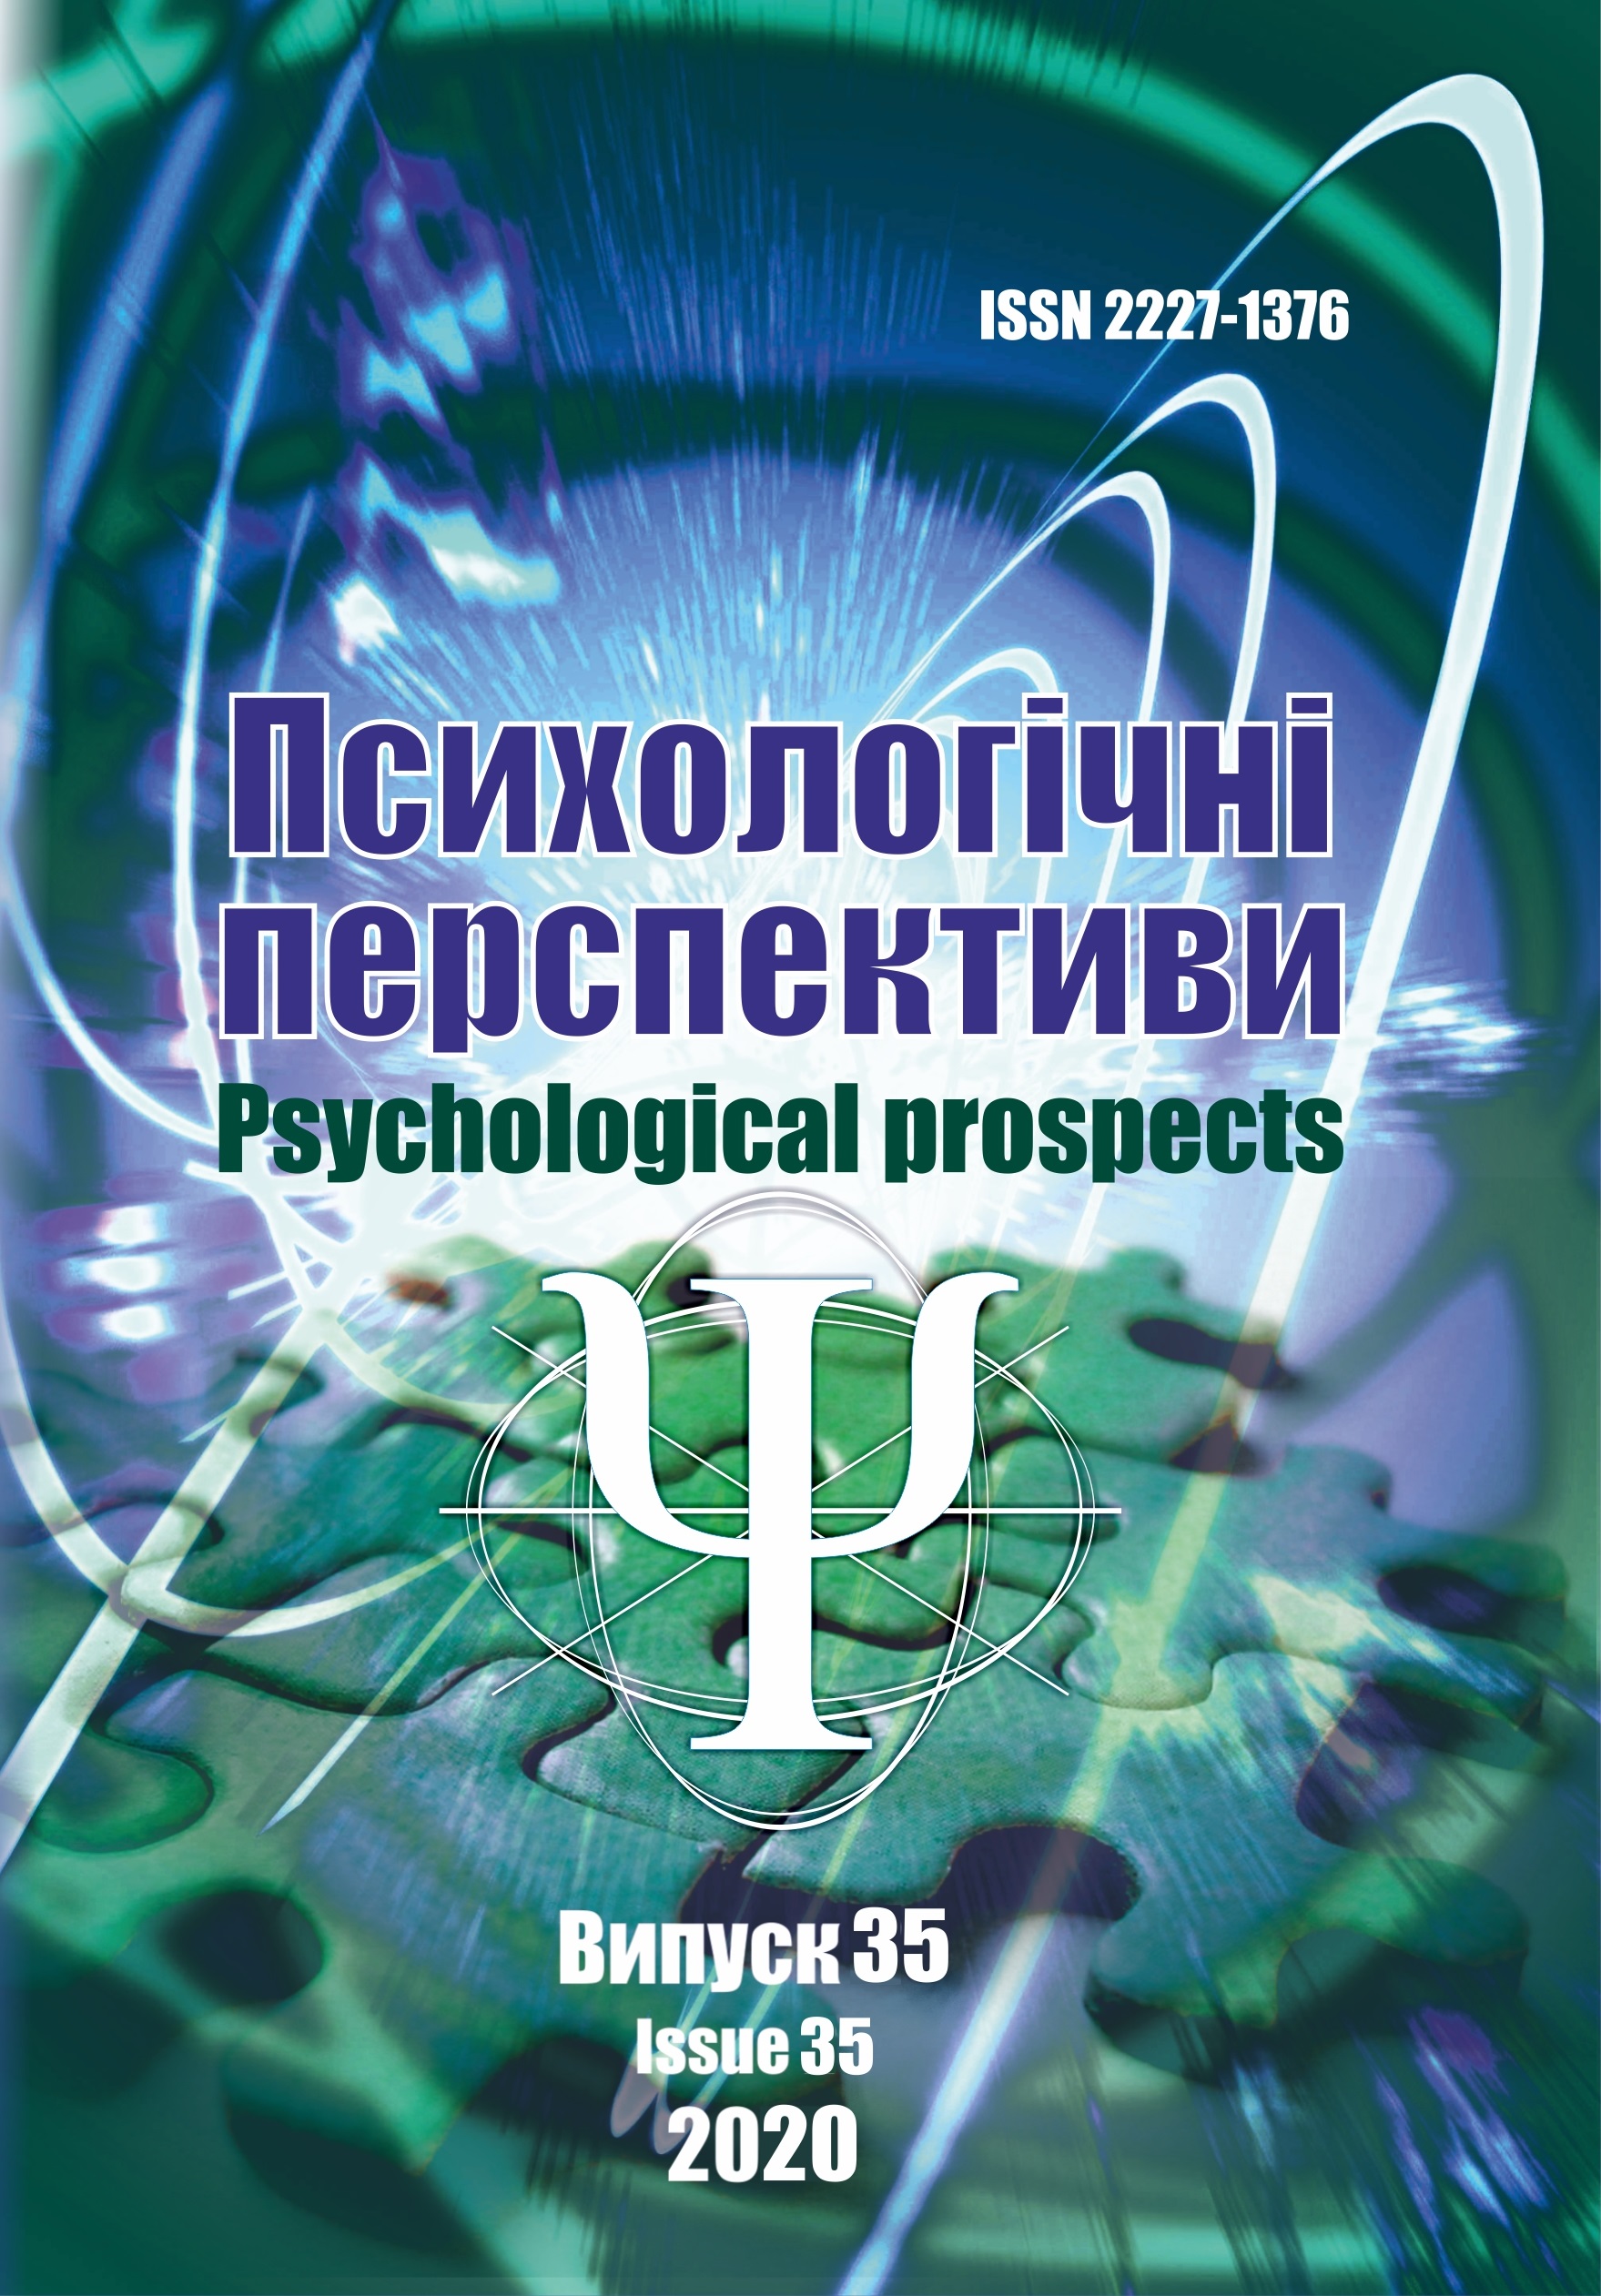 					View No. 35 (2020): Psychological Prospects Journal
				